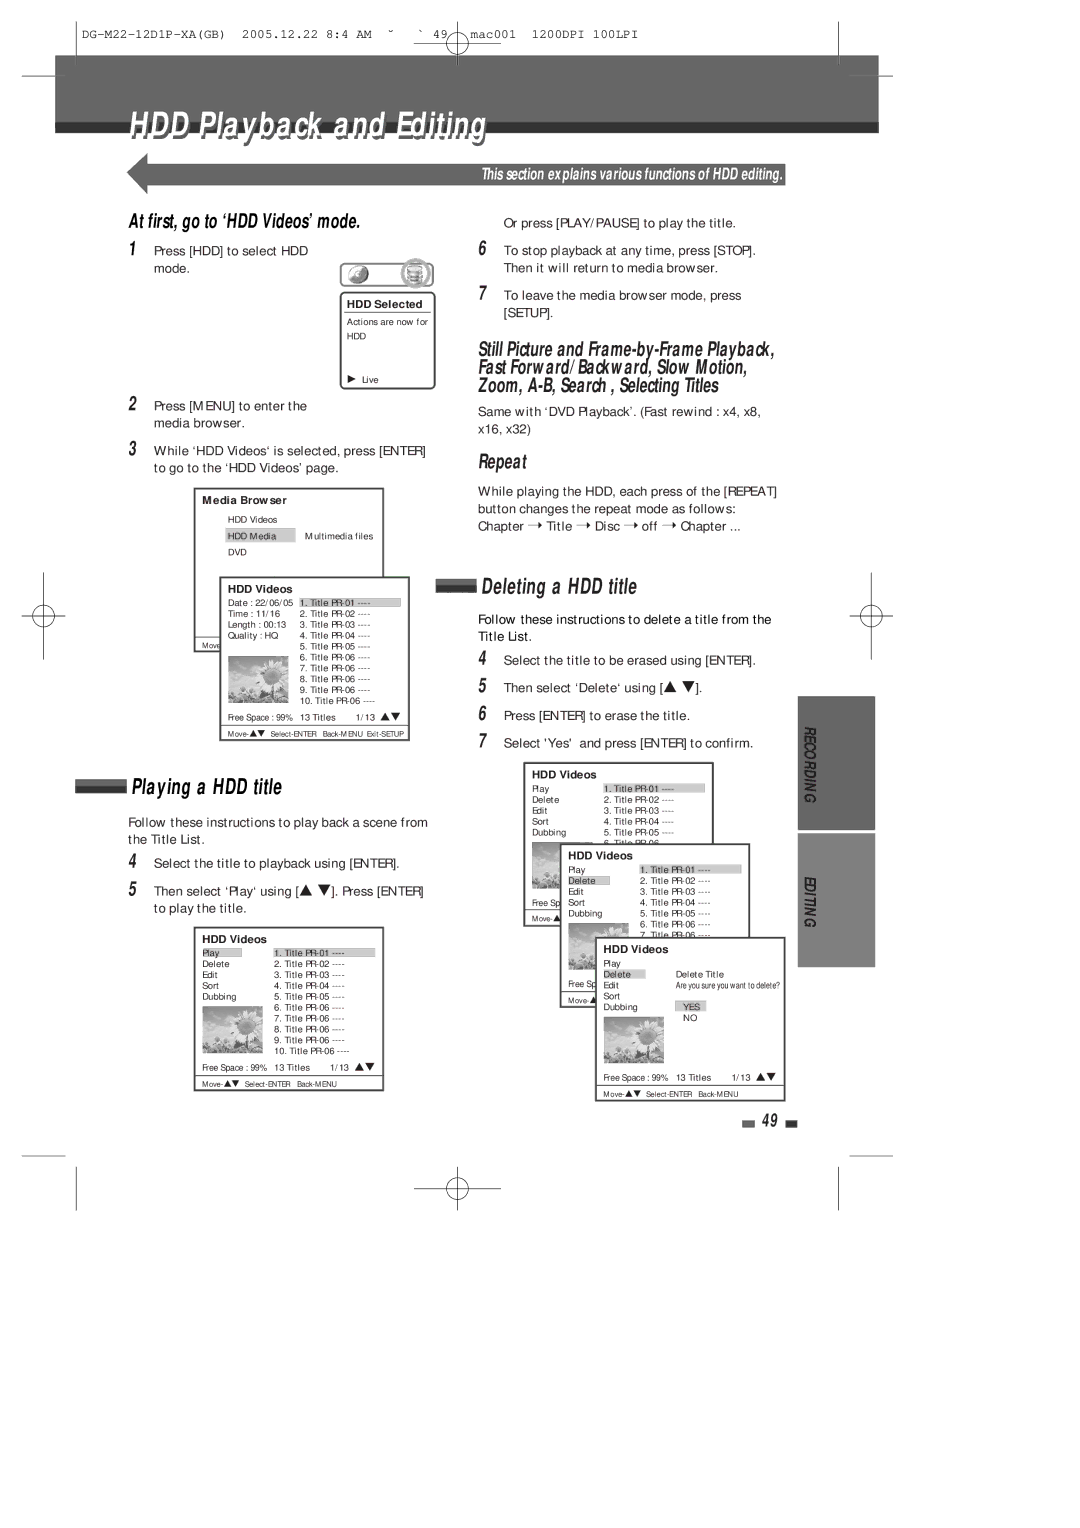 Daewoo DHR-8100P user manual HDD Playback and Editing, Playing a HDD title, Deleting a HDD title 